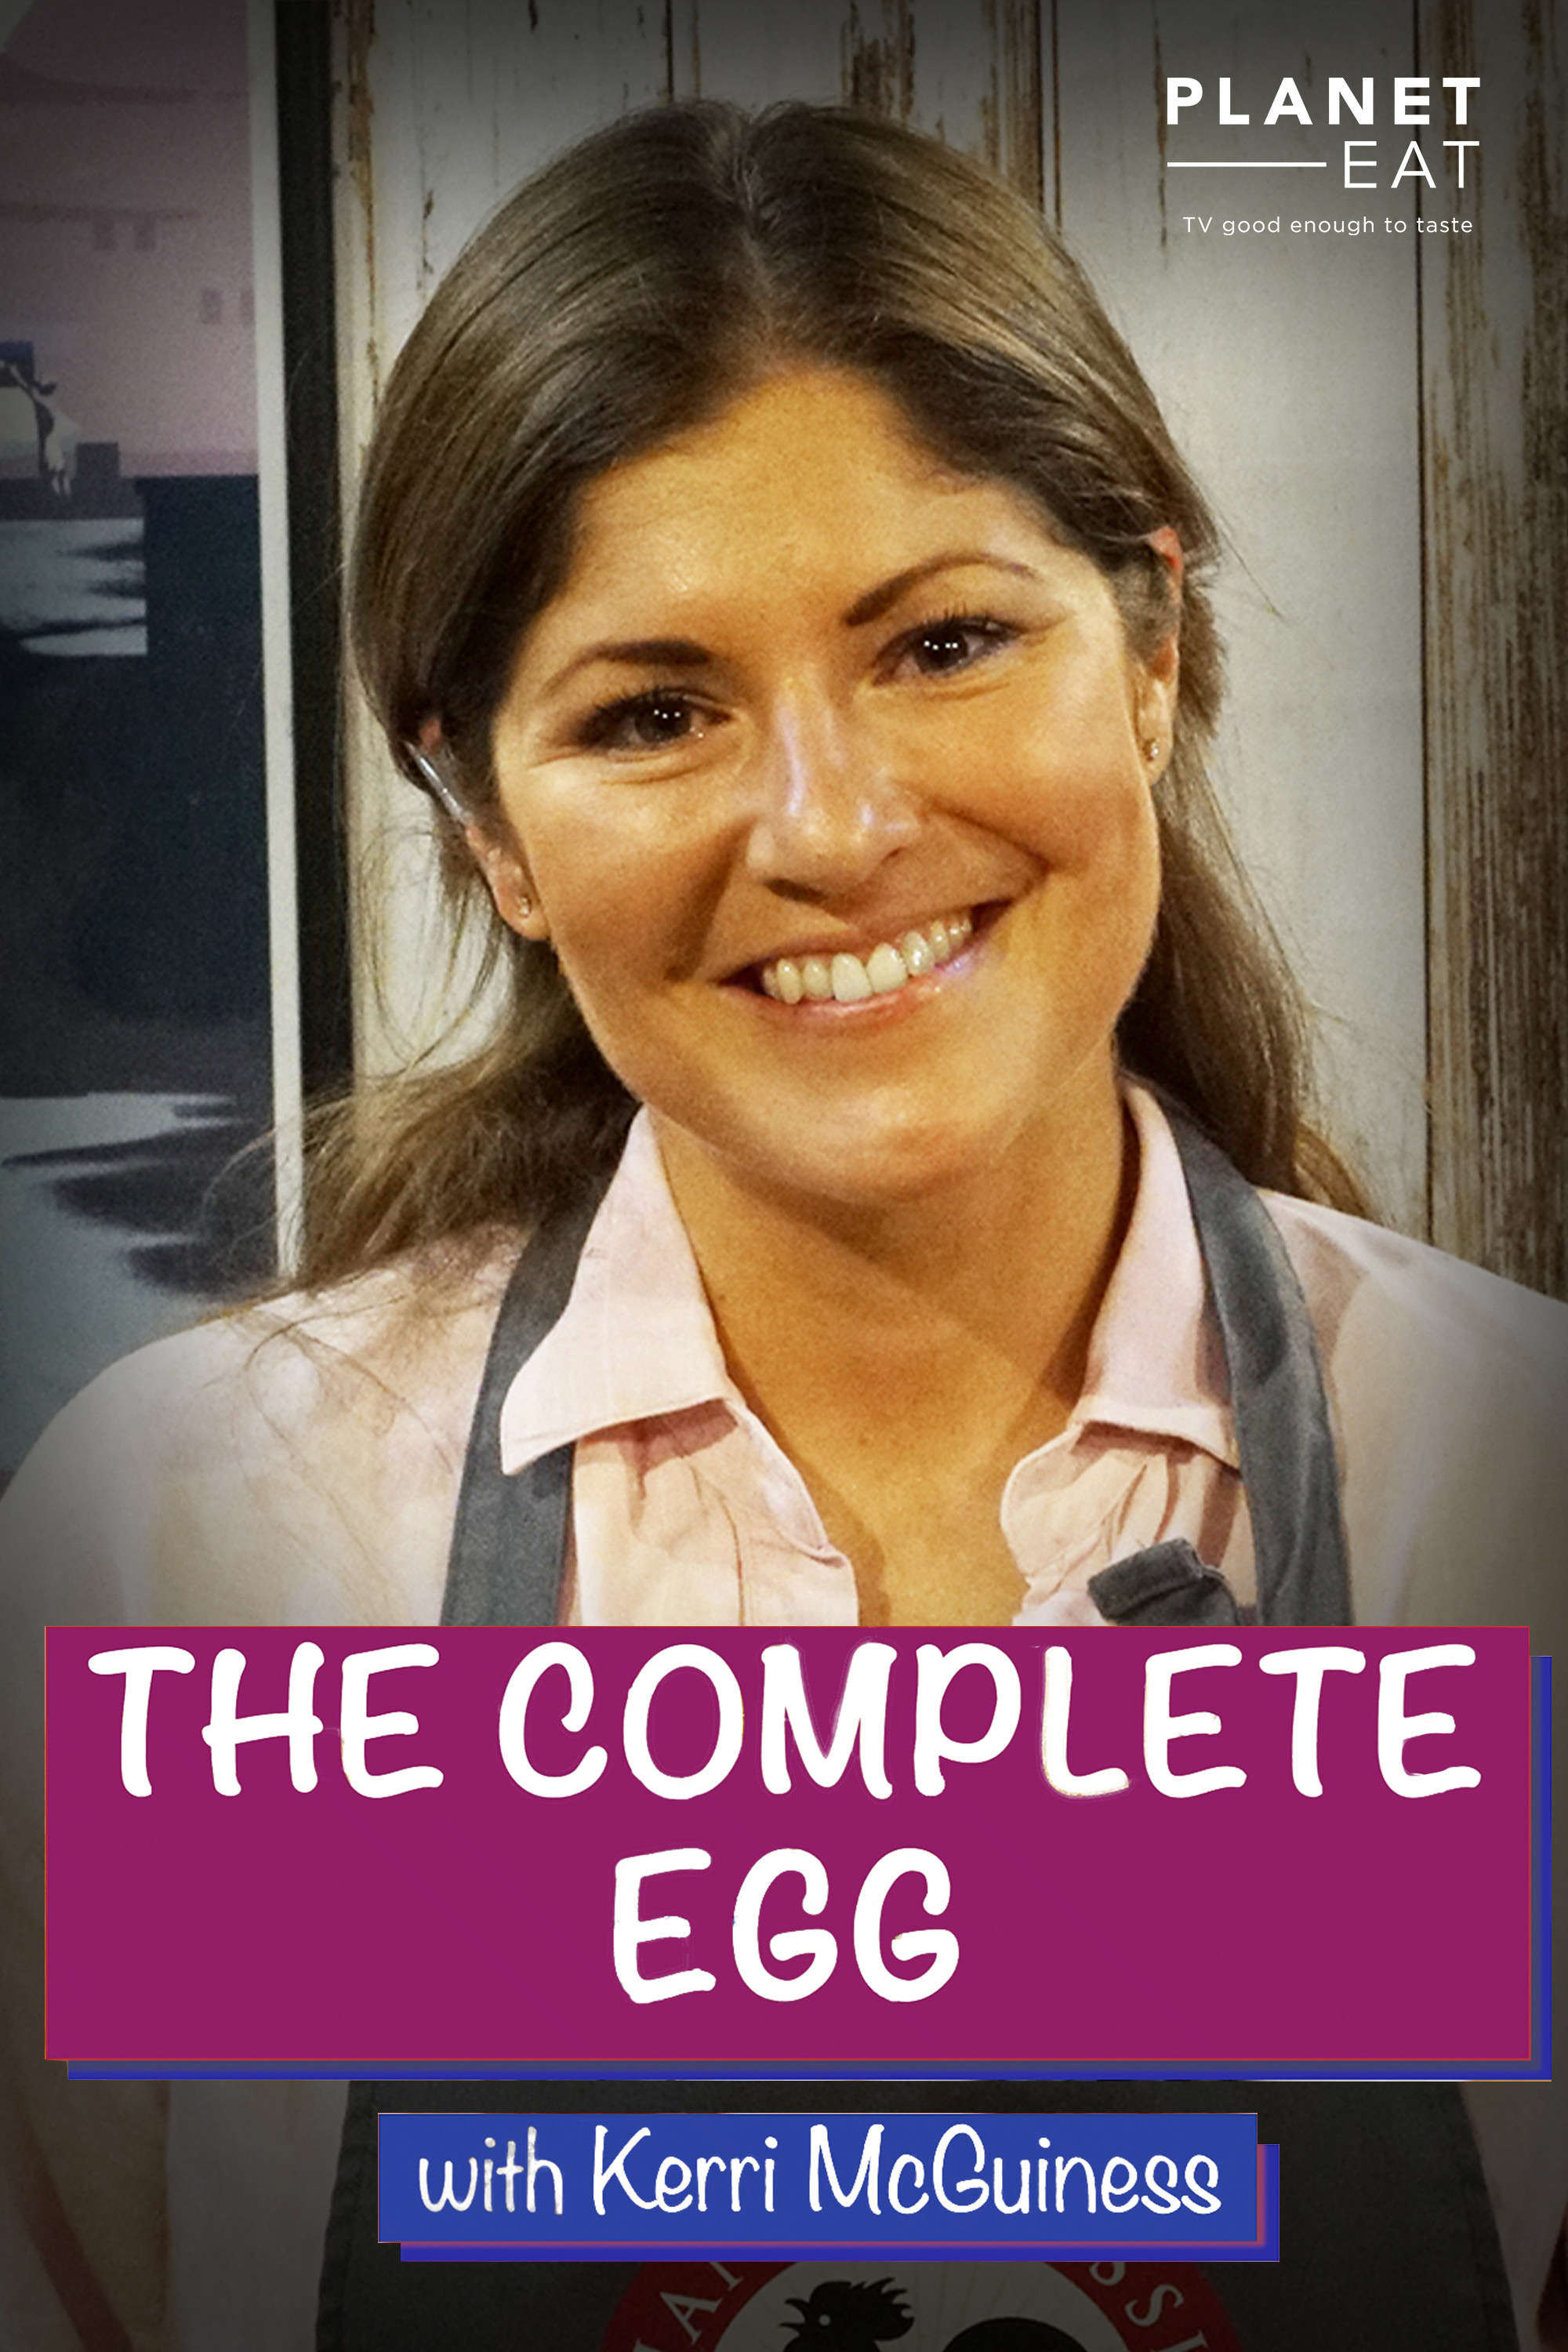 The Complete Egg